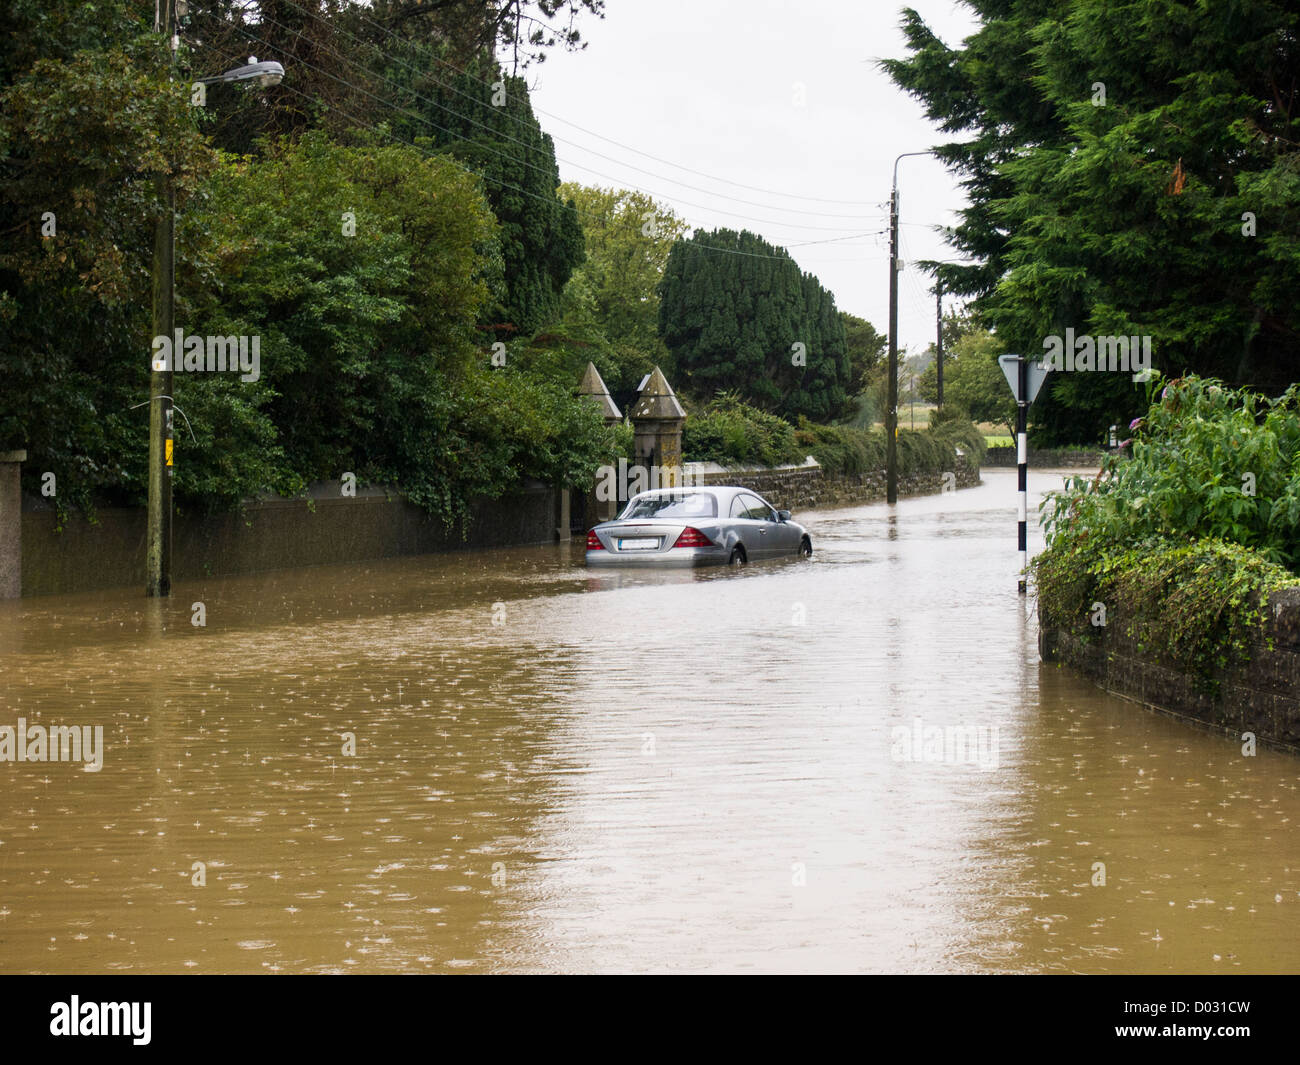 Heavy rain in mid-September 2012 led to this flood in Skerries, county Dublin, Ireland with a car stuck in it Stock Photo